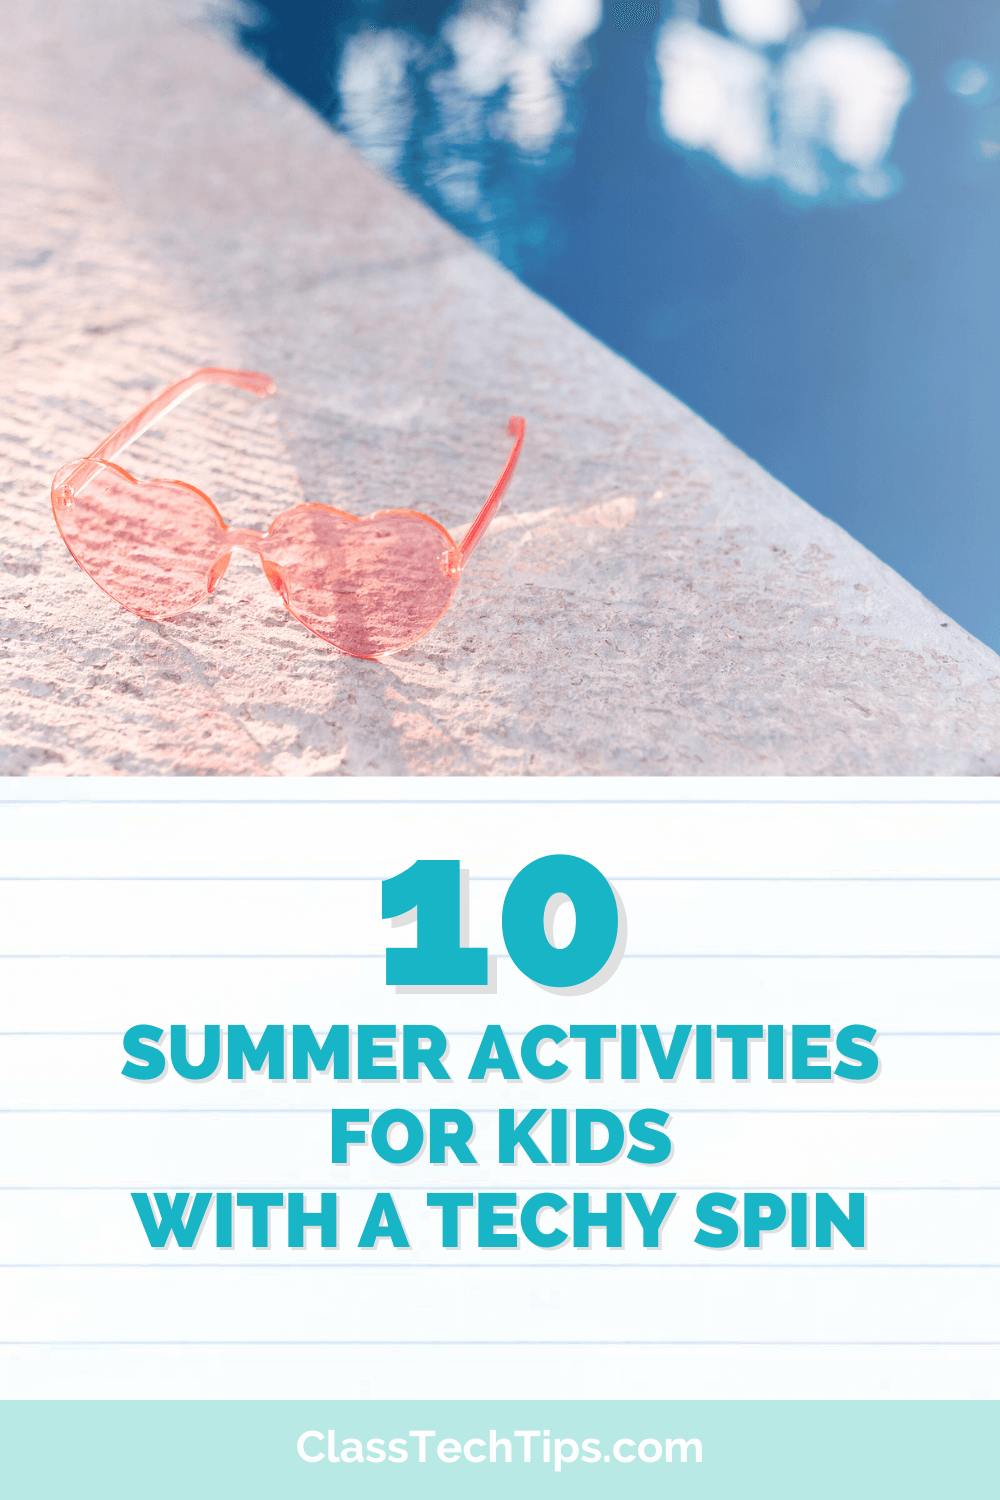 A vibrant summer scene featuring heart-shaped pink sunglasses on a poolside ledge, overlaying the title "10 Summer Activities for Kids with a Techy Spin" from ClassTechTips.com.